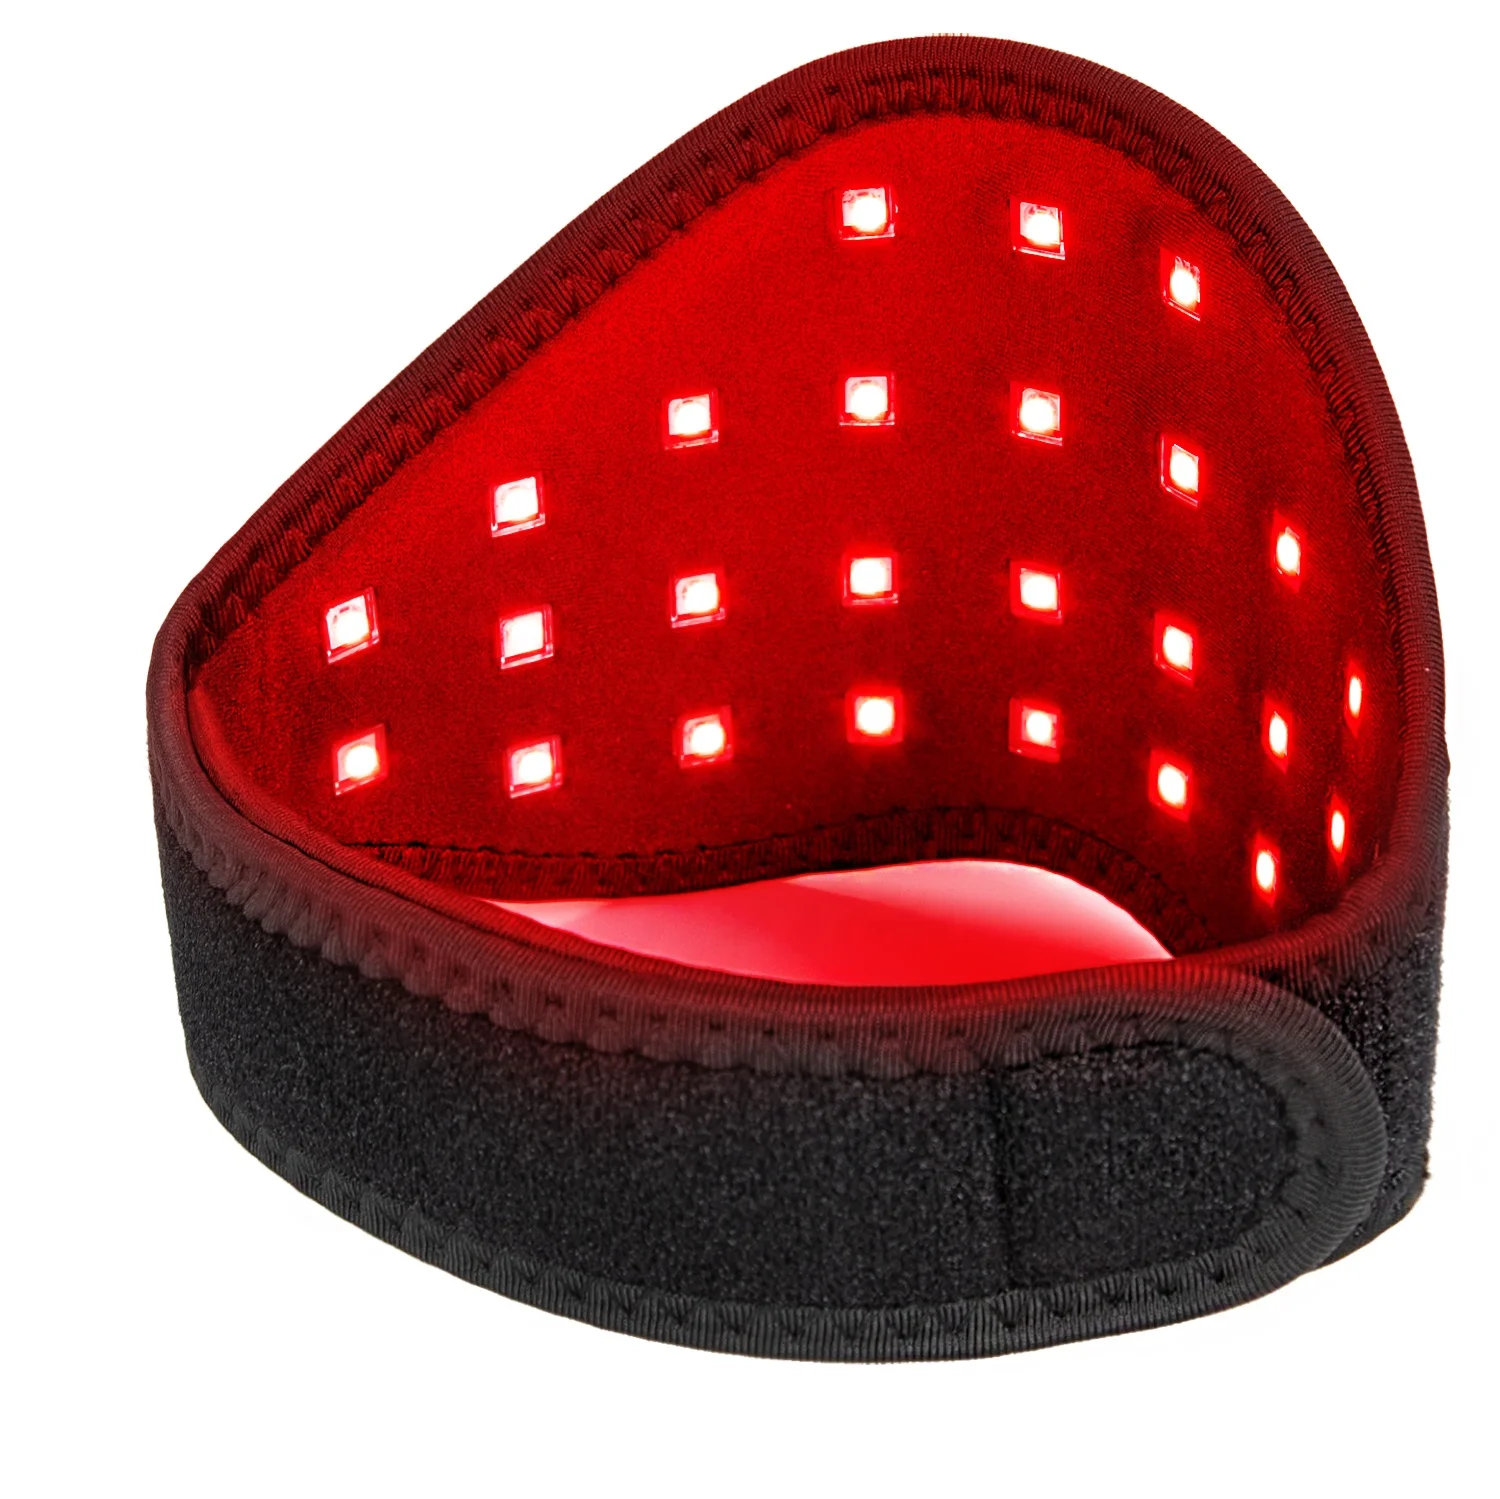 

DGYAO 2022 Beauty Equipment Wearable Devices Red Light Near Infrared Led Light Therapy Pain Relief For Neck Red Light Pad